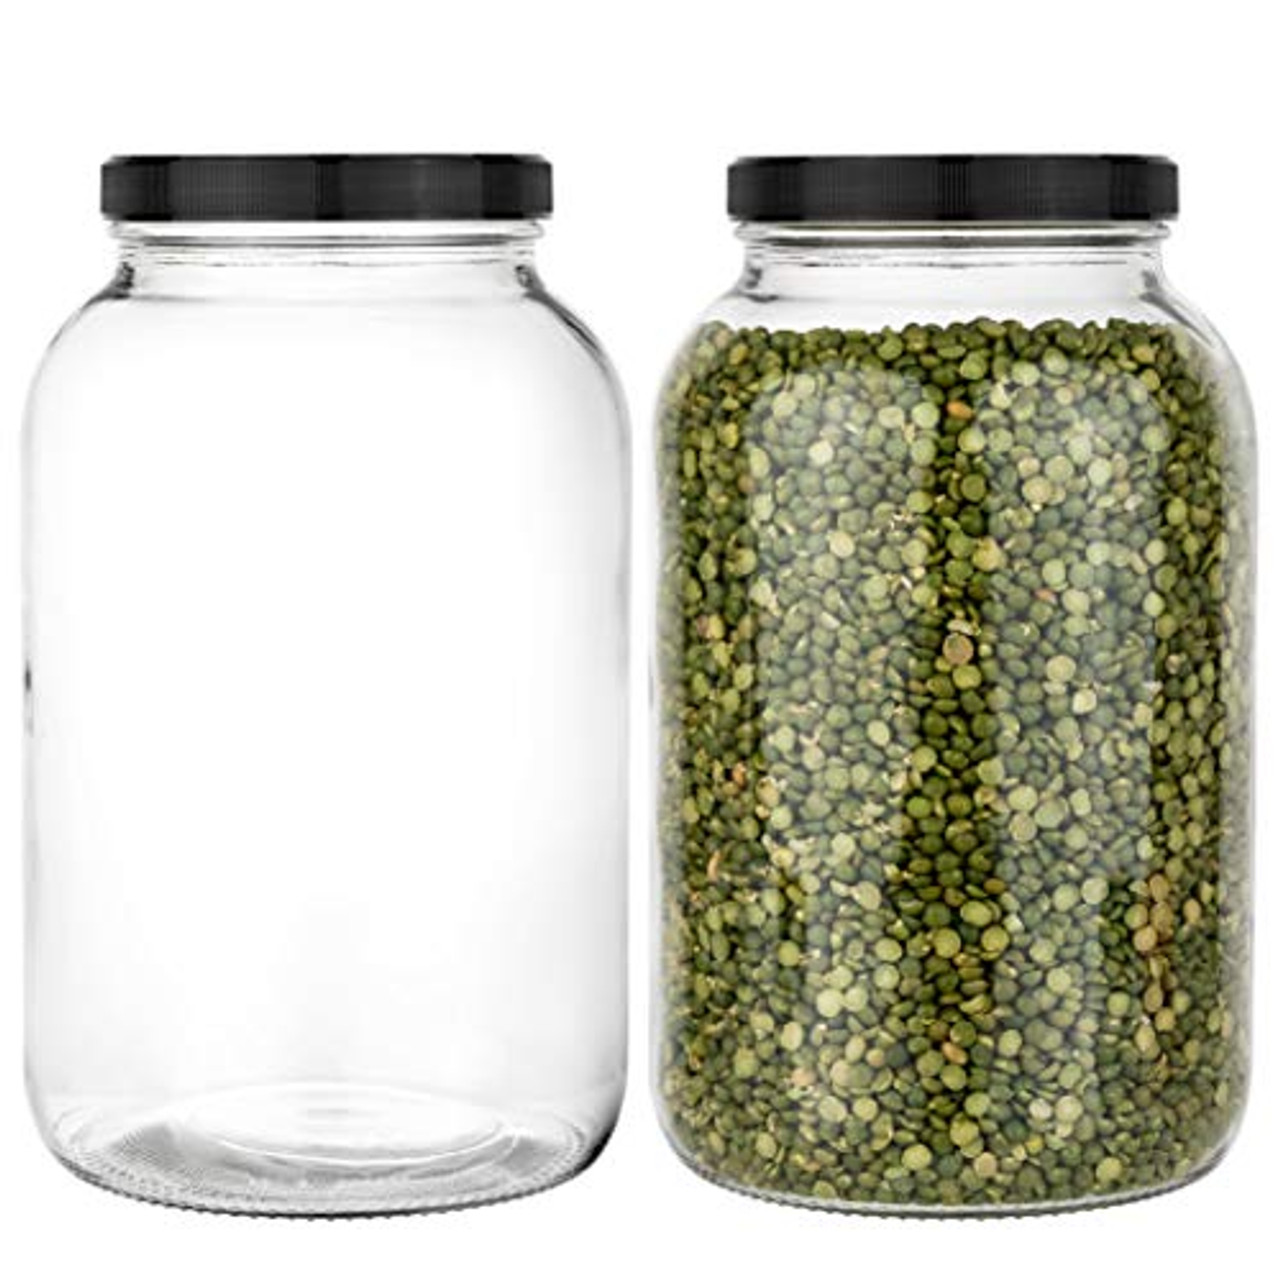 2 Pack - 1 Gallon Mason Jar - Glass Jar Wide Mouth with Plastic Lid -  Container for Storing Dry Foods, Spices, Pasta, Legumes and Pet Food -  Airtight Kitchen Storage (Black Cap)